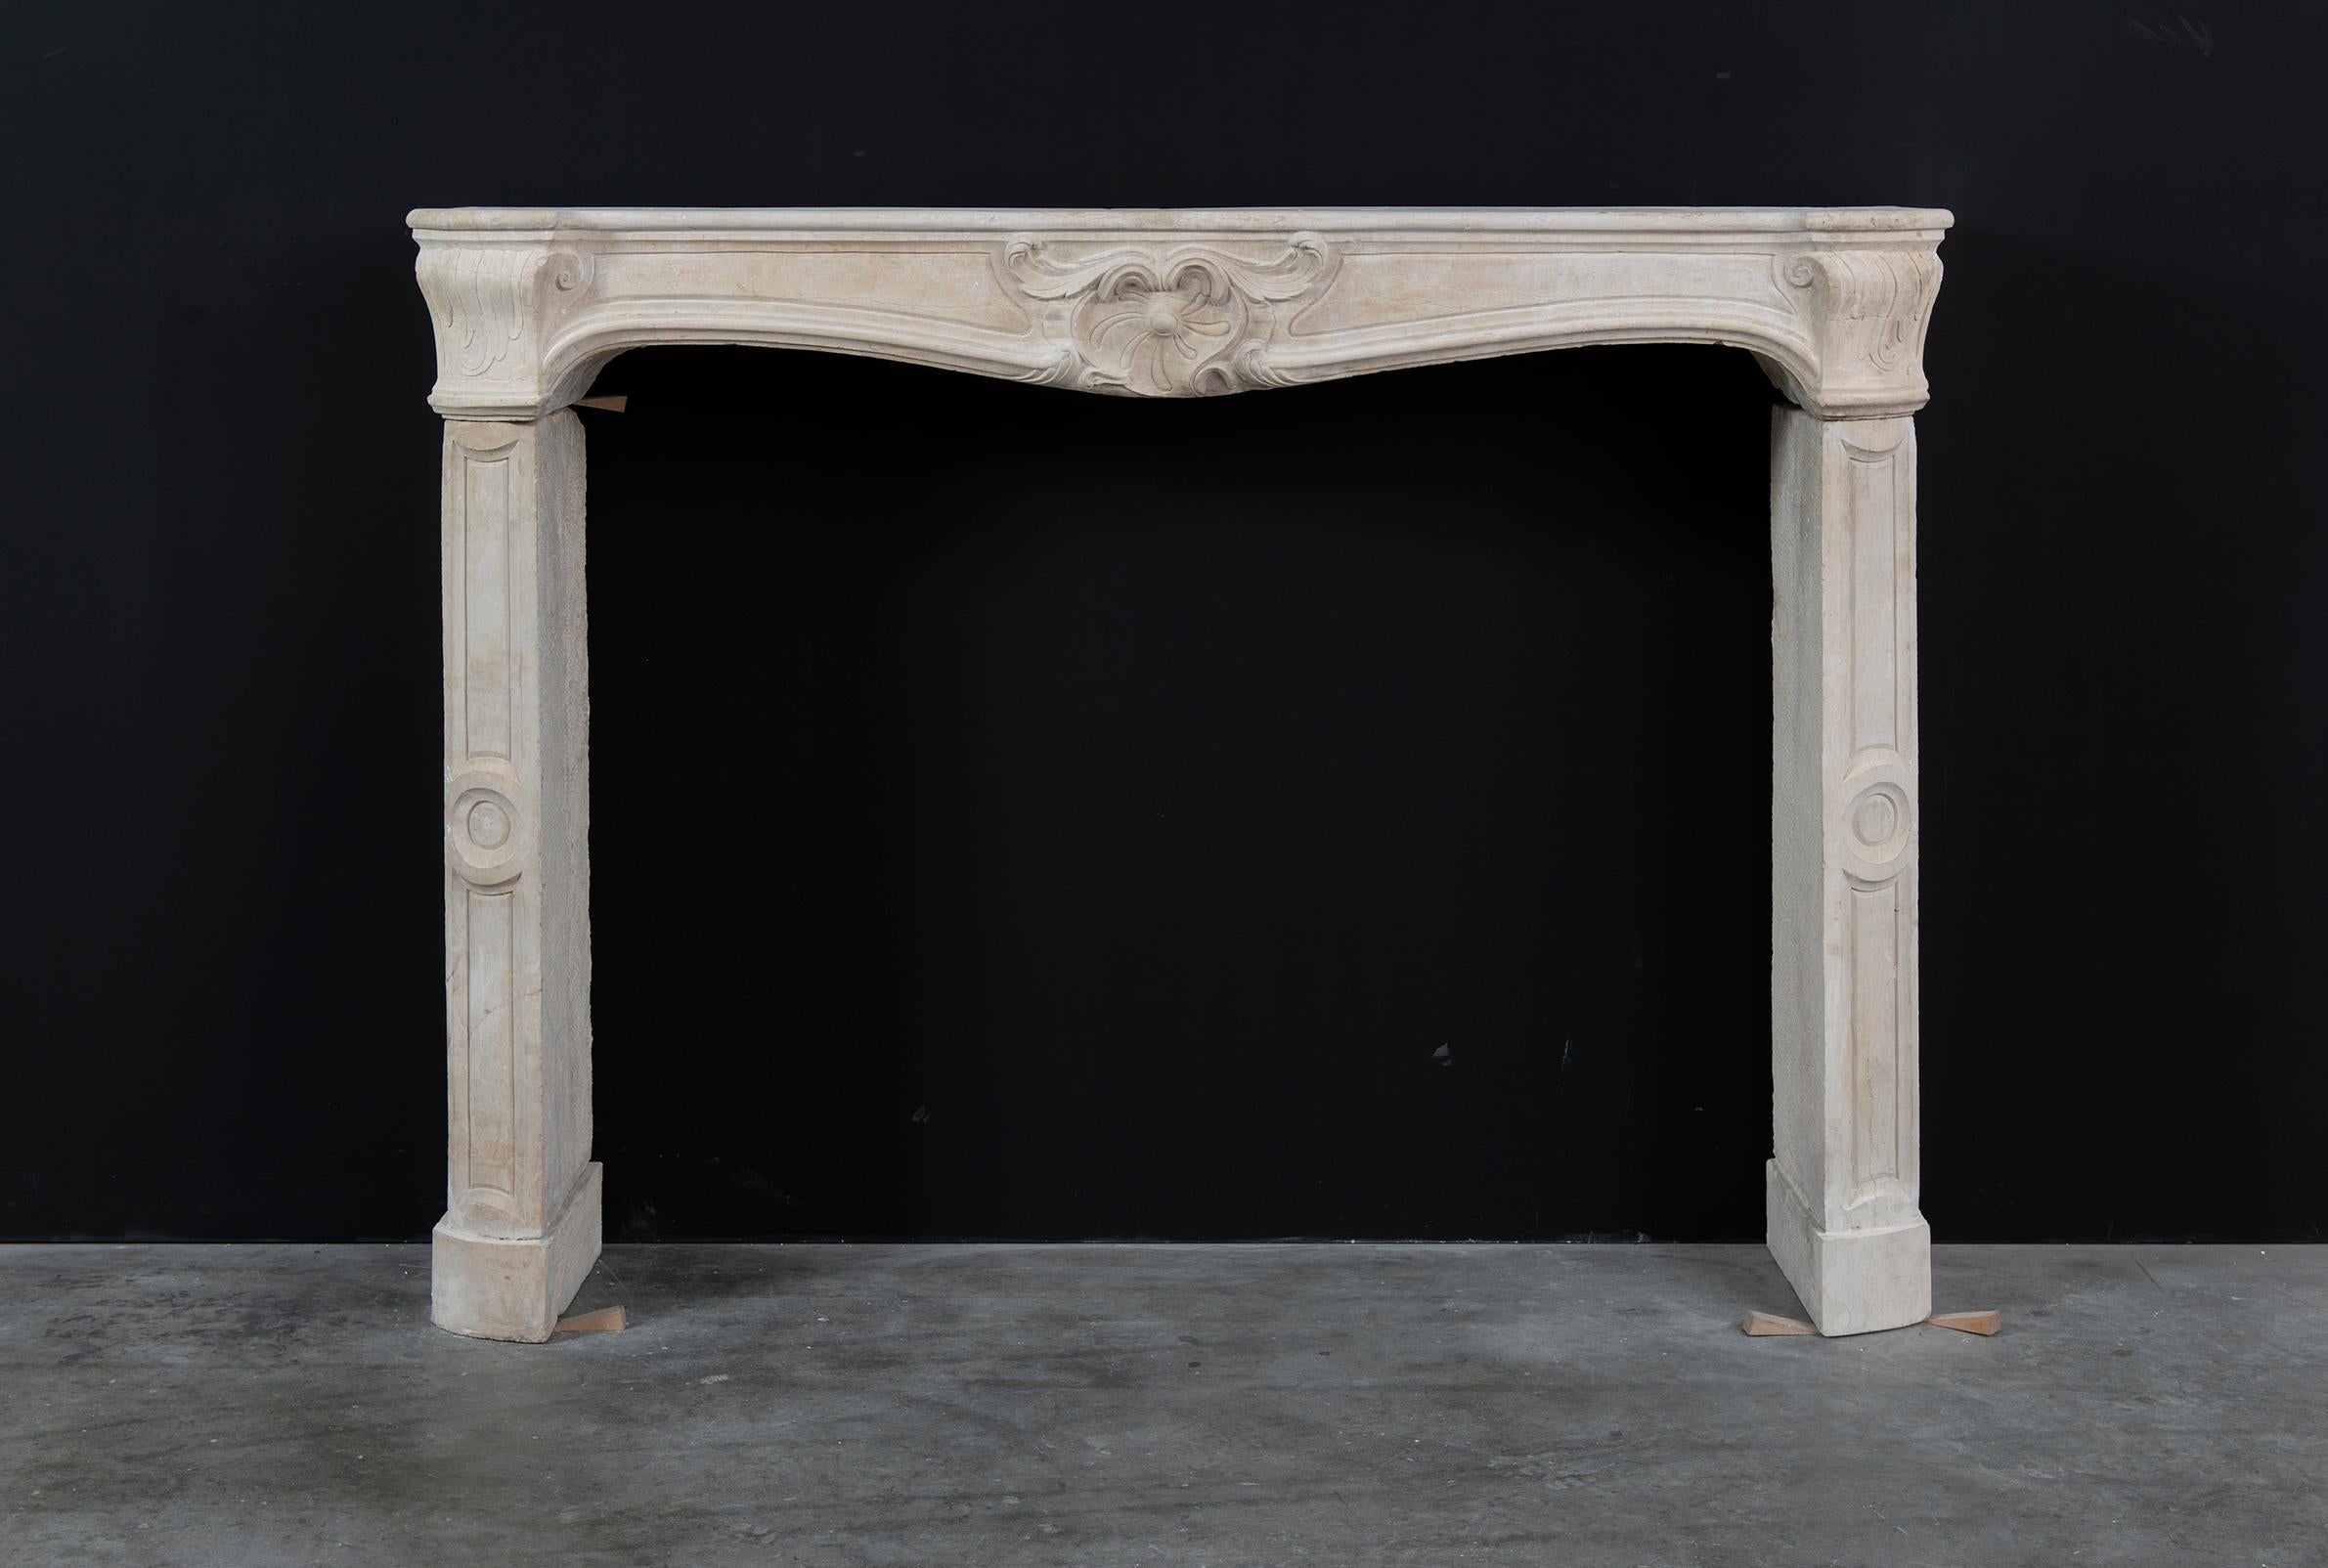 An early 19th century French Louis xv limestone fireplace mantel. 

The moulded and profiled shelf is integral to the frieze which is centred by a beautiful acymetrical shell and is carved from the solid. 
The curled leaf endblocks are supported by